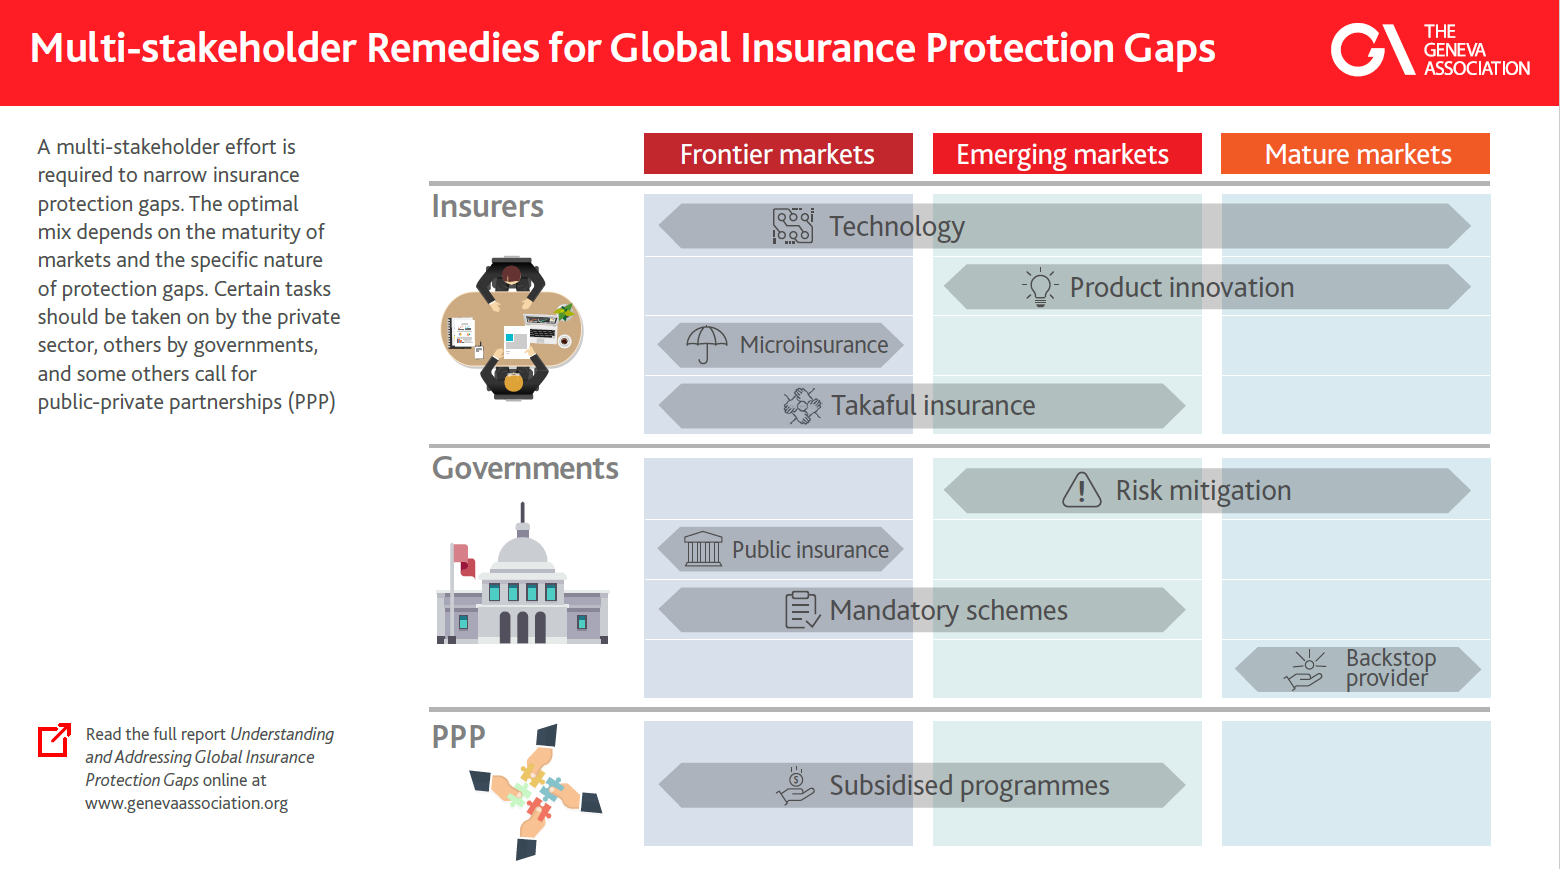 Multi-stakeholder Remedies for Global Insurance Protection Gaps infographic image